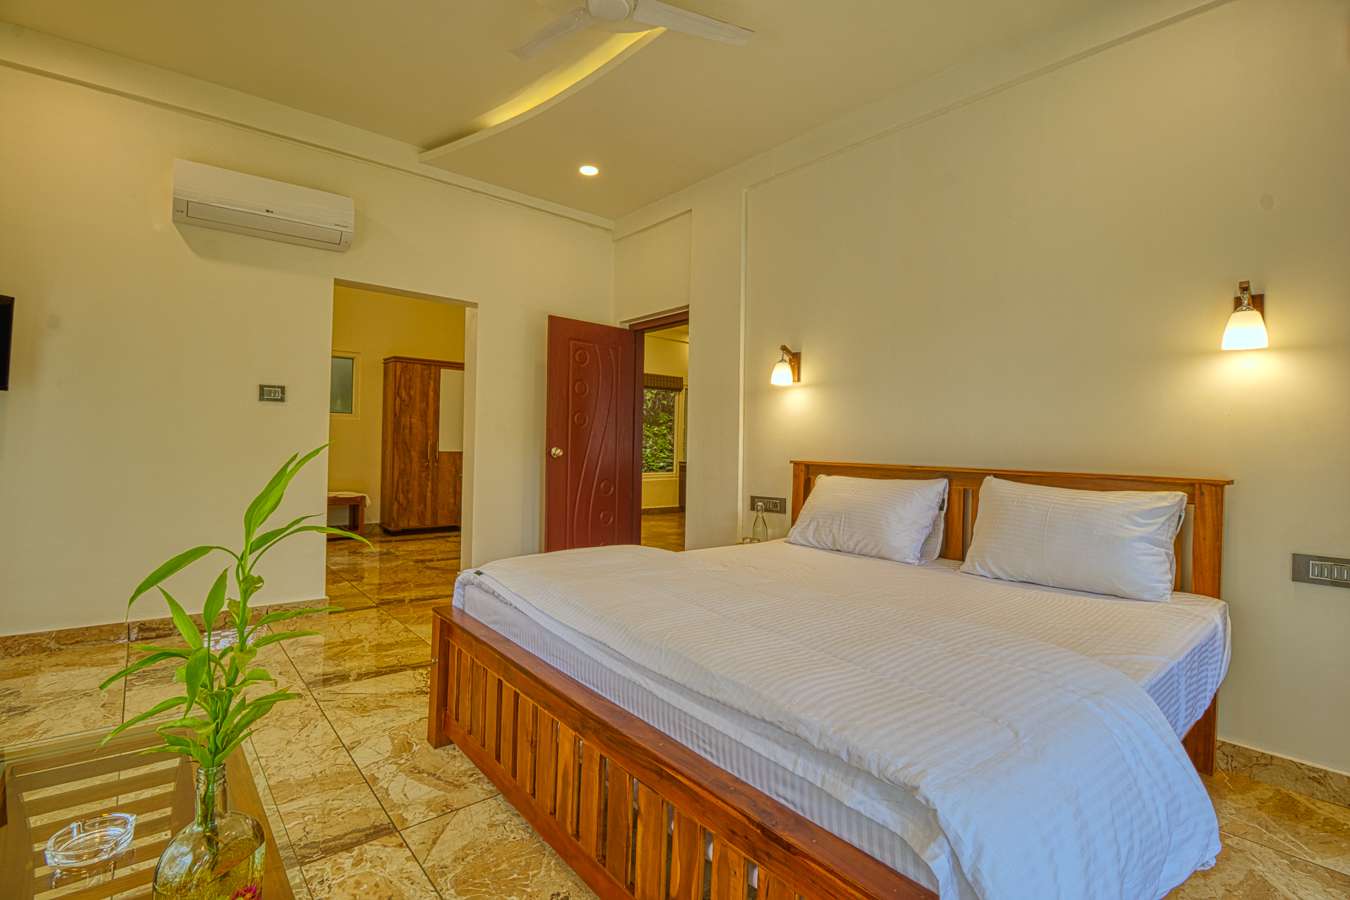 Spacious rooms of 350 Sq ft with independent private balcony facing the Kabini River. Each room can accommodate two adults.